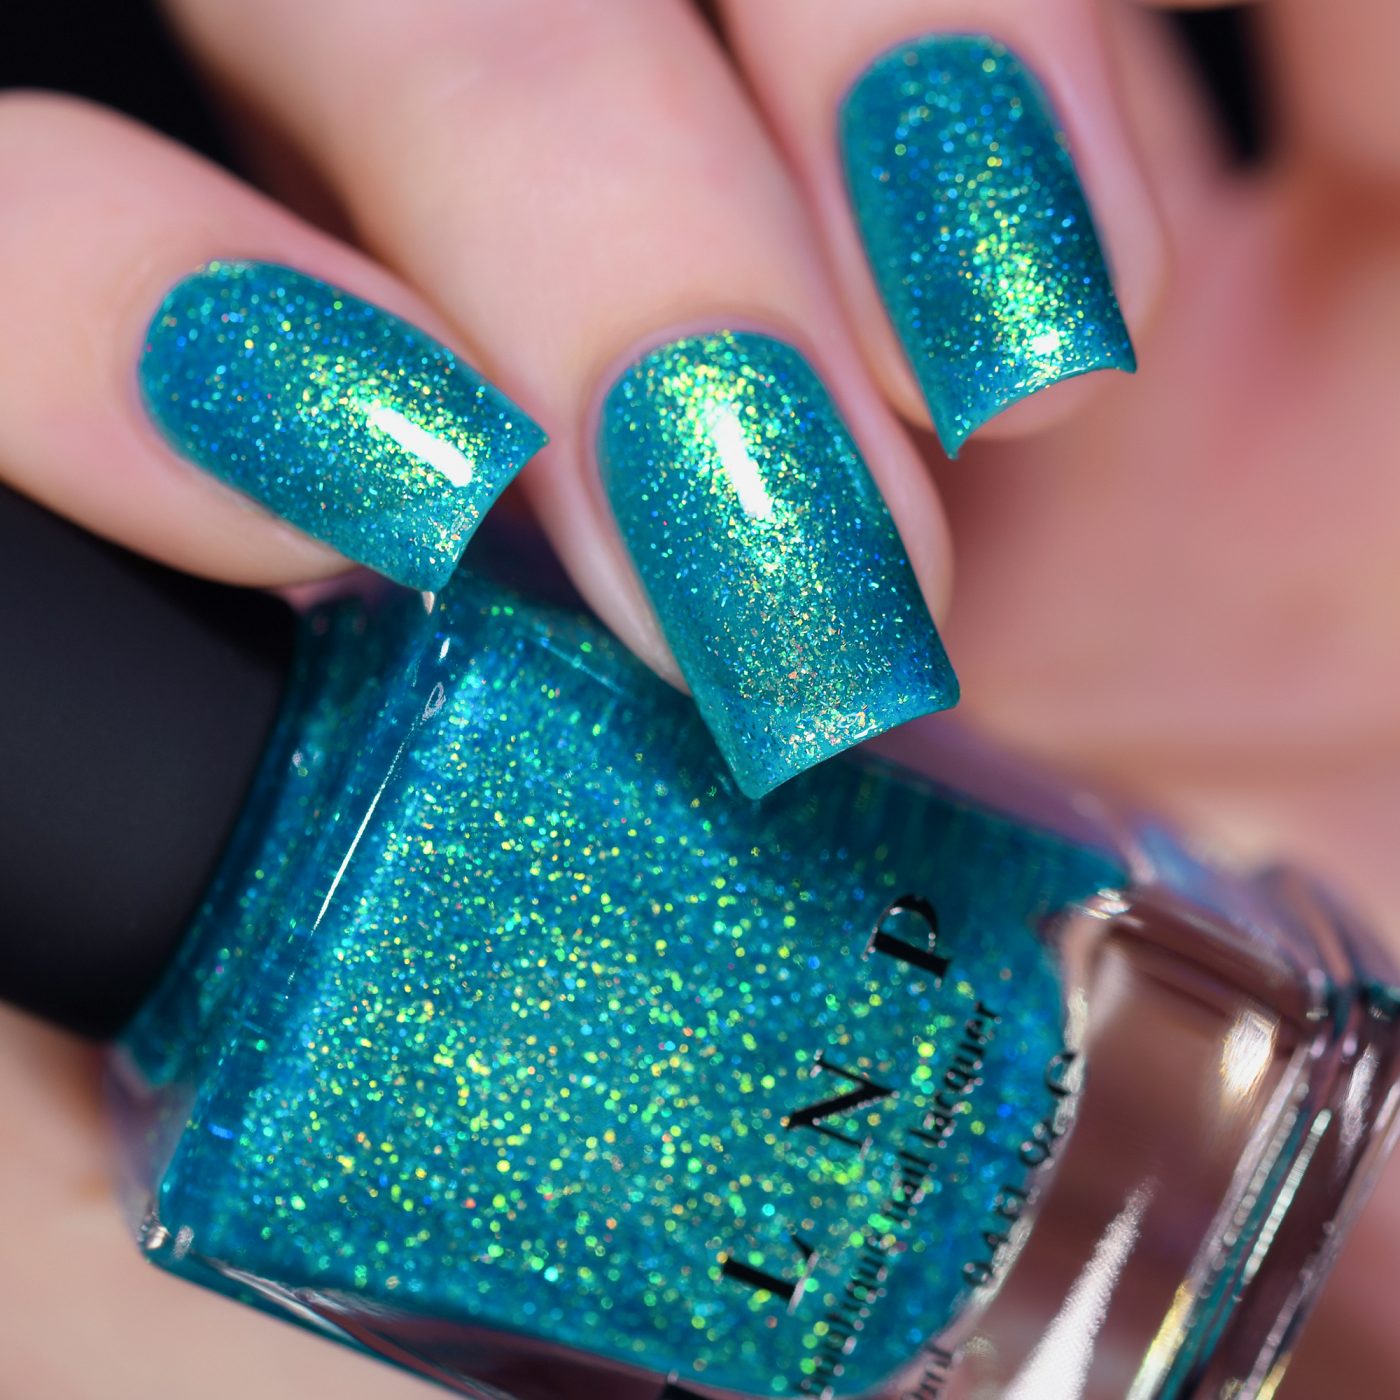 Blue Lagoon - Shimmering Teal Holographic Jelly Nail Polish by ILNP